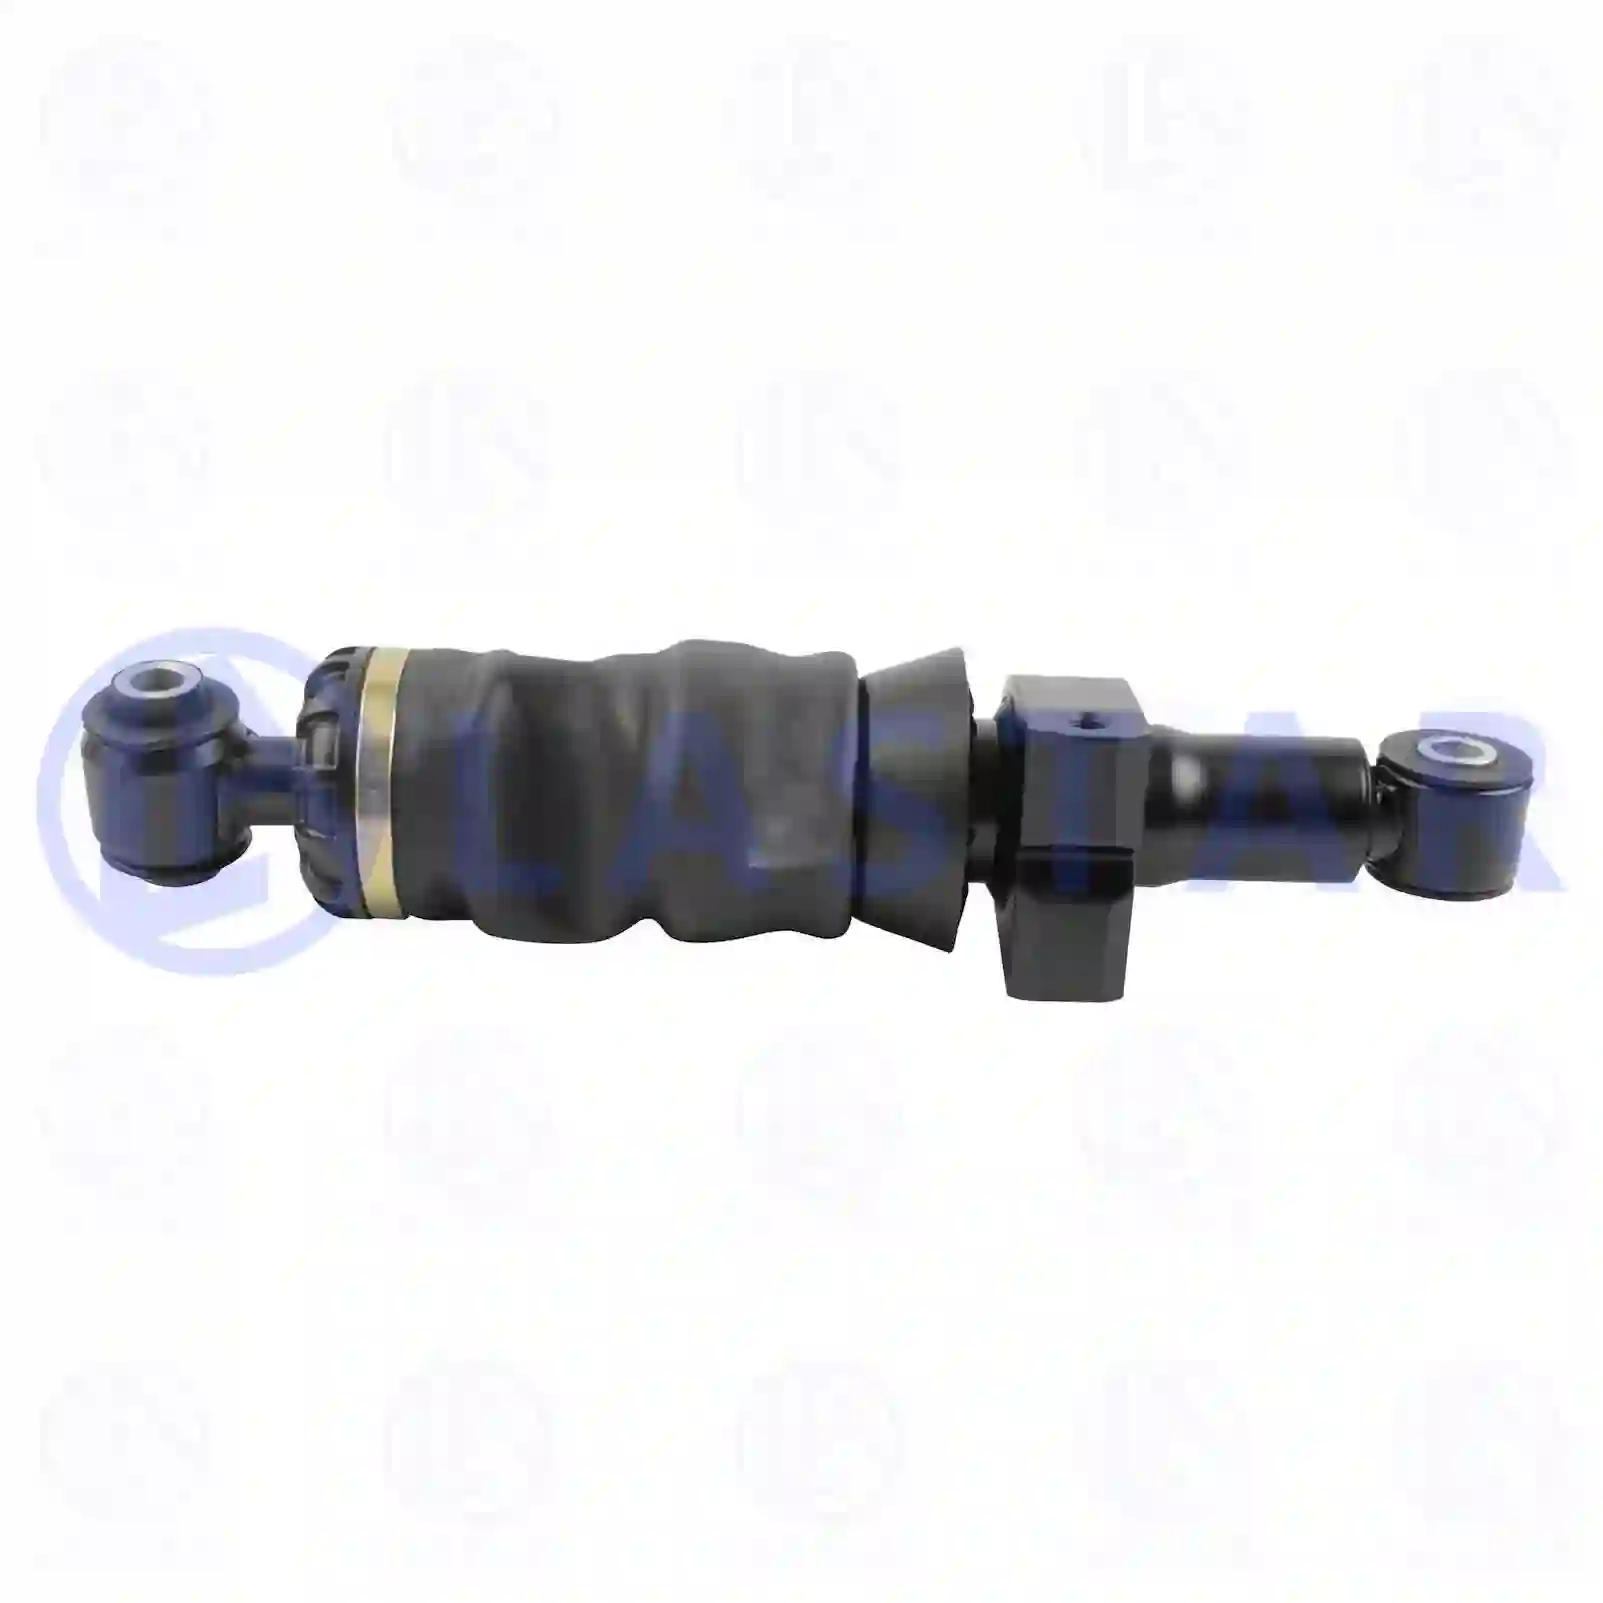 Cabin shock absorber, with air bellow, 77735598, 41028763, 41028764, 500348793, 500377878, ||  77735598 Lastar Spare Part | Truck Spare Parts, Auotomotive Spare Parts Cabin shock absorber, with air bellow, 77735598, 41028763, 41028764, 500348793, 500377878, ||  77735598 Lastar Spare Part | Truck Spare Parts, Auotomotive Spare Parts